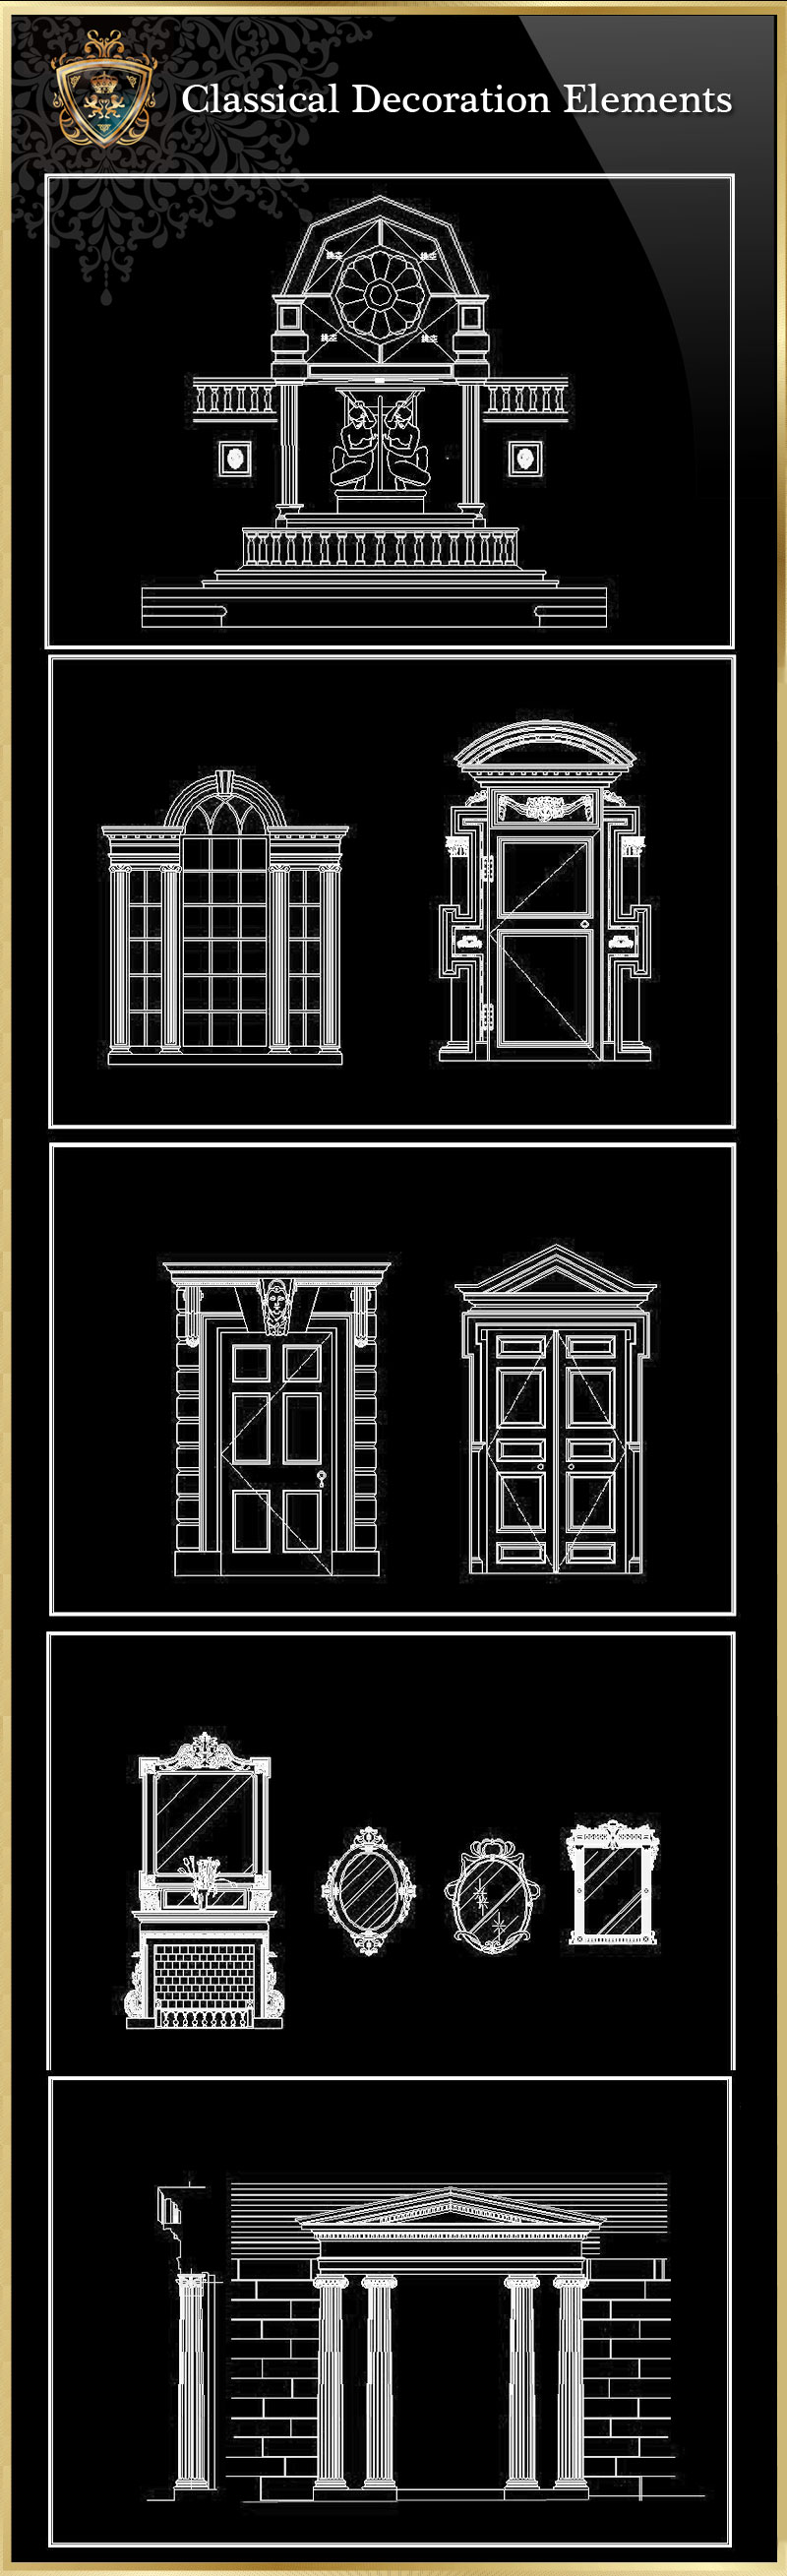 ★【Classical Decoration Elements 03】Luxury home, Luxury Villas, Luxury Palace, Architecture Ornamental Parts, Decorative Inserts & Accessories, Handrail & Stairway Parts, Outdoor House Accessories, Euro Architectural Components, Arcade